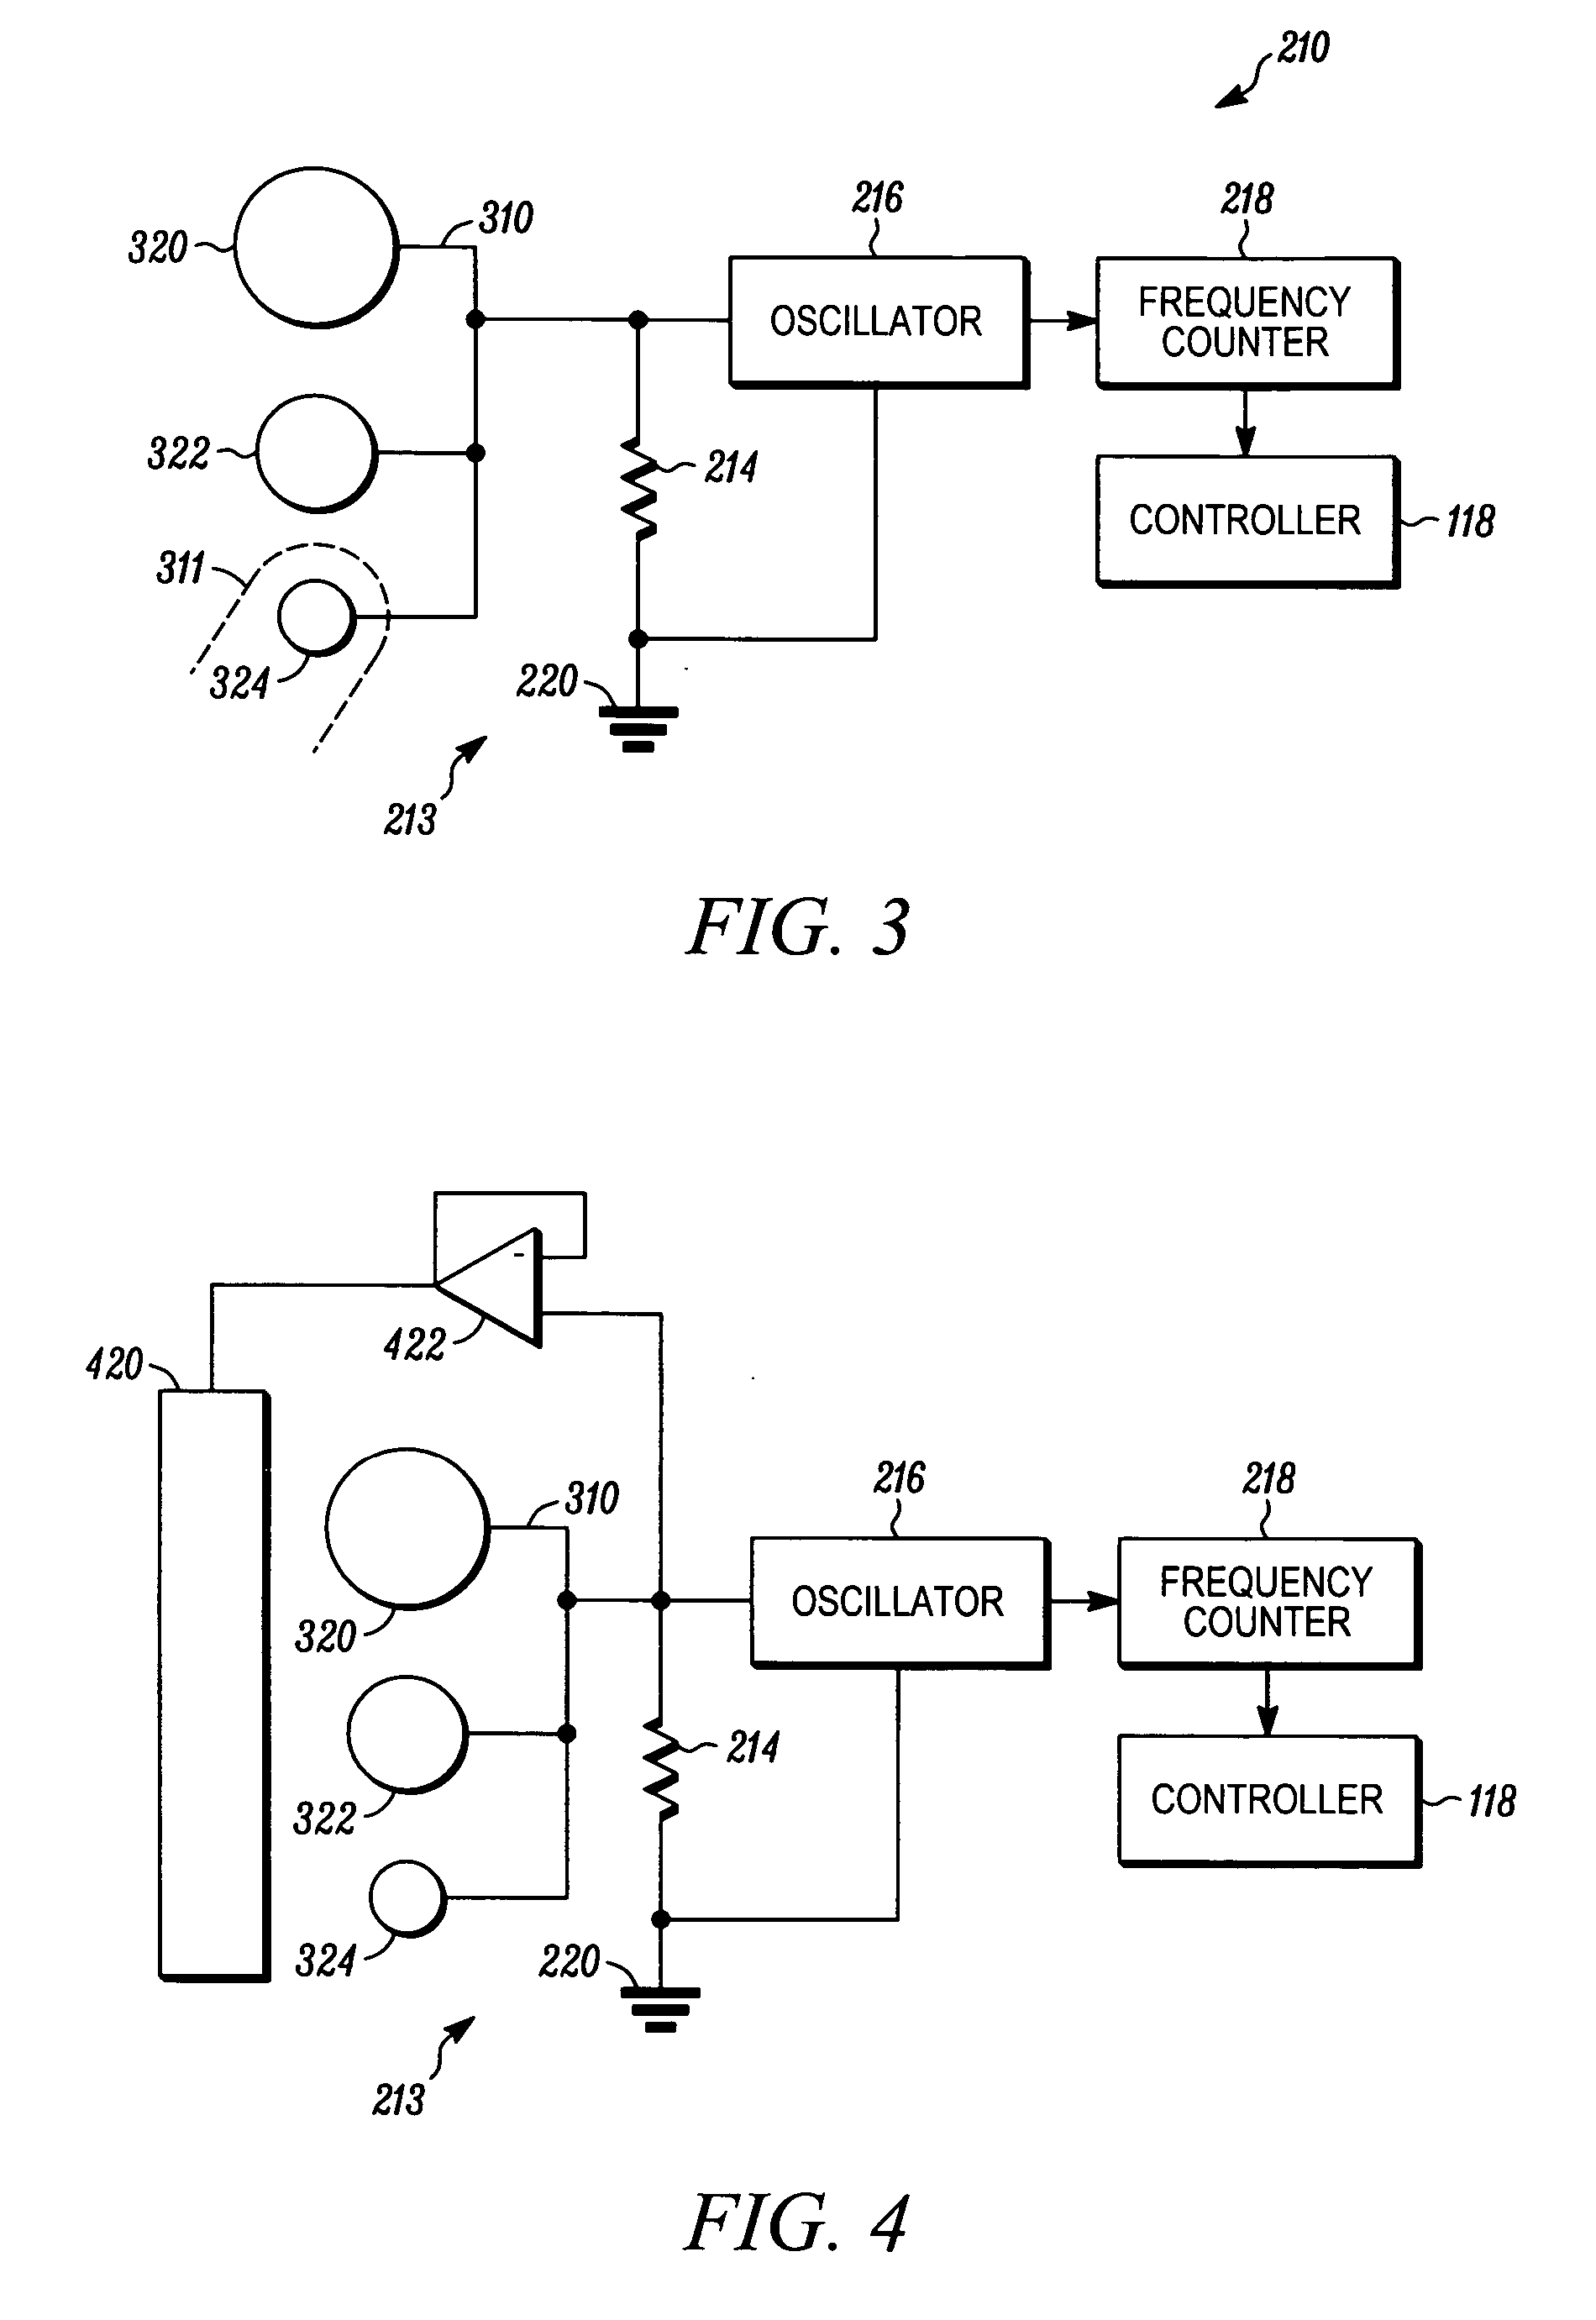 Apparatus and method of determining a user selection in a user interface